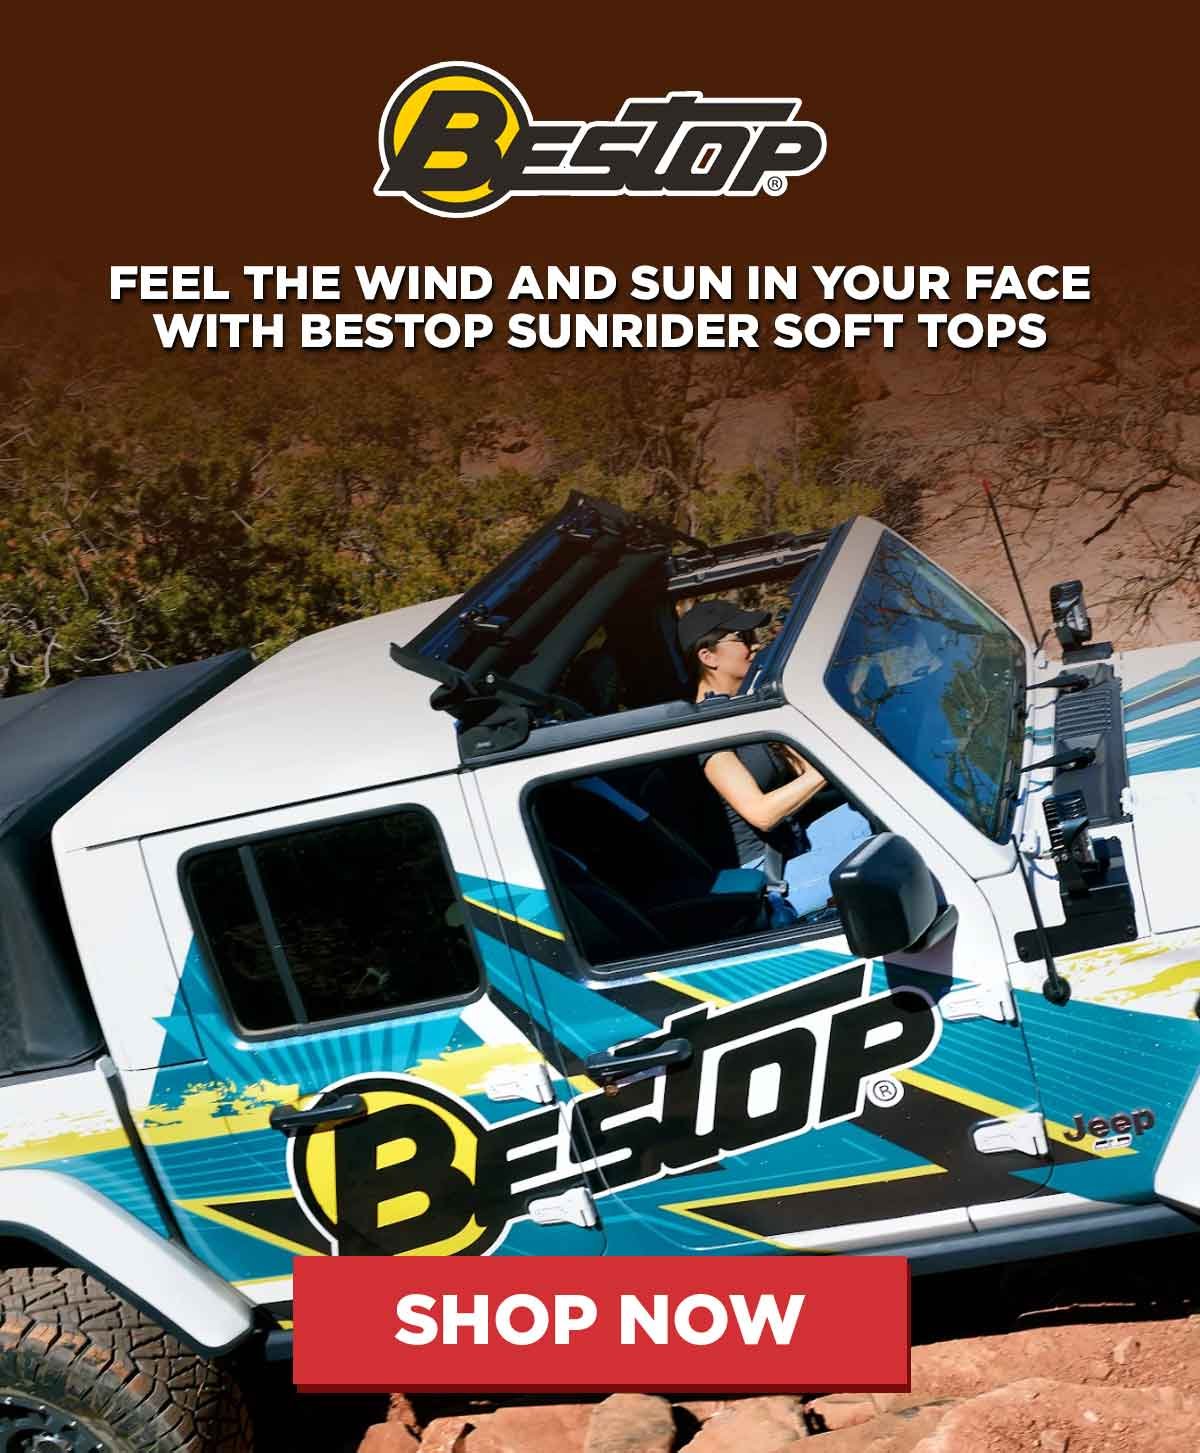 Feel The Wind and Sun In Your Face With Bestop Sunrider Soft Tops